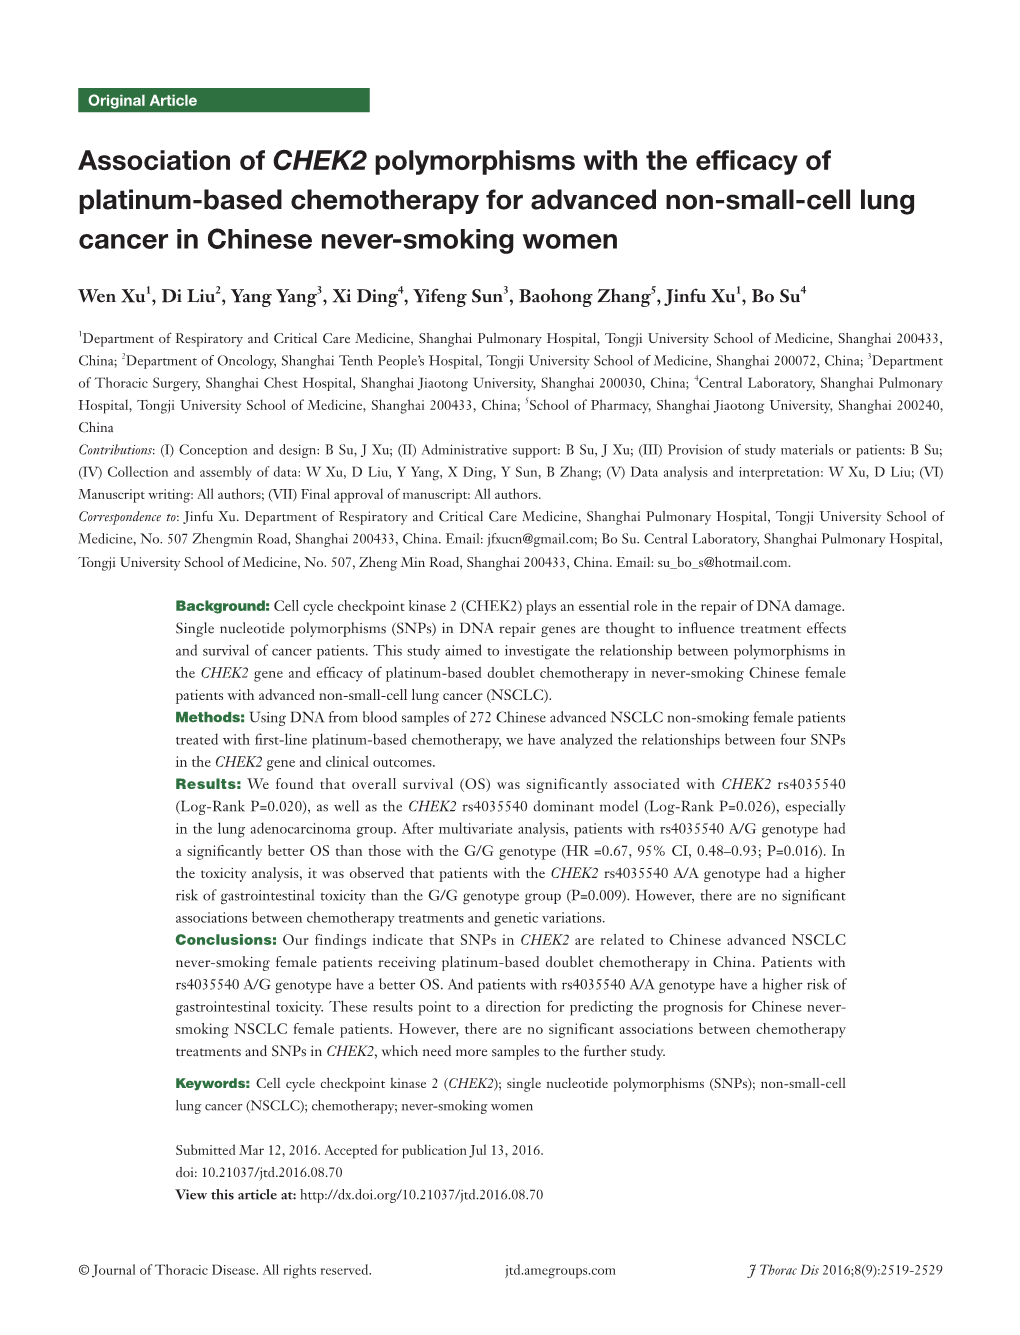 Association of CHEK2 Polymorphisms with the Efficacy of Platinum-Based Chemotherapy for Advanced Non-Small-Cell Lung Cancer in Chinese Never-Smoking Women